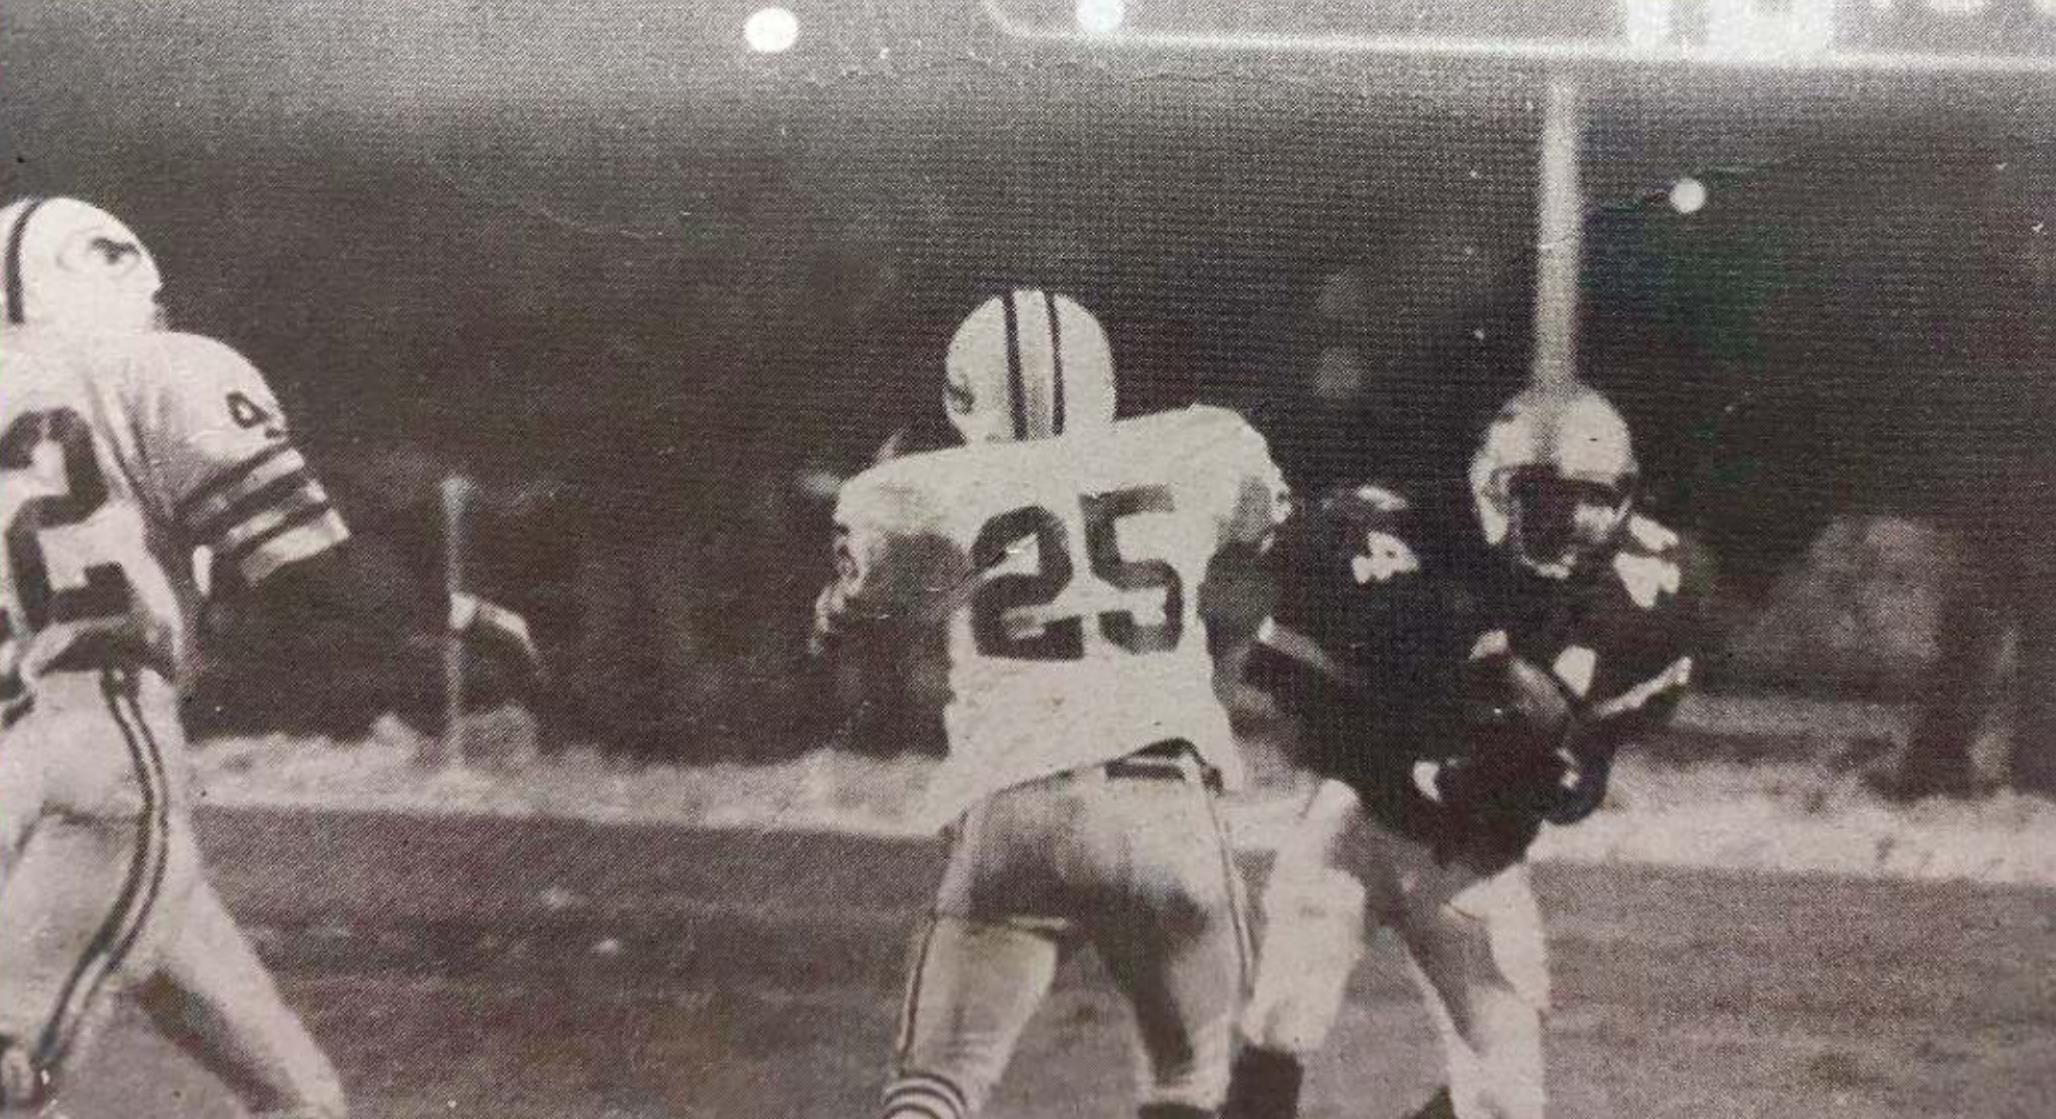 Cameron Gossen catches a pass from Cal Hankins as Clinton defenders try to tackle him during the 1992 4A State Championship. File Photo